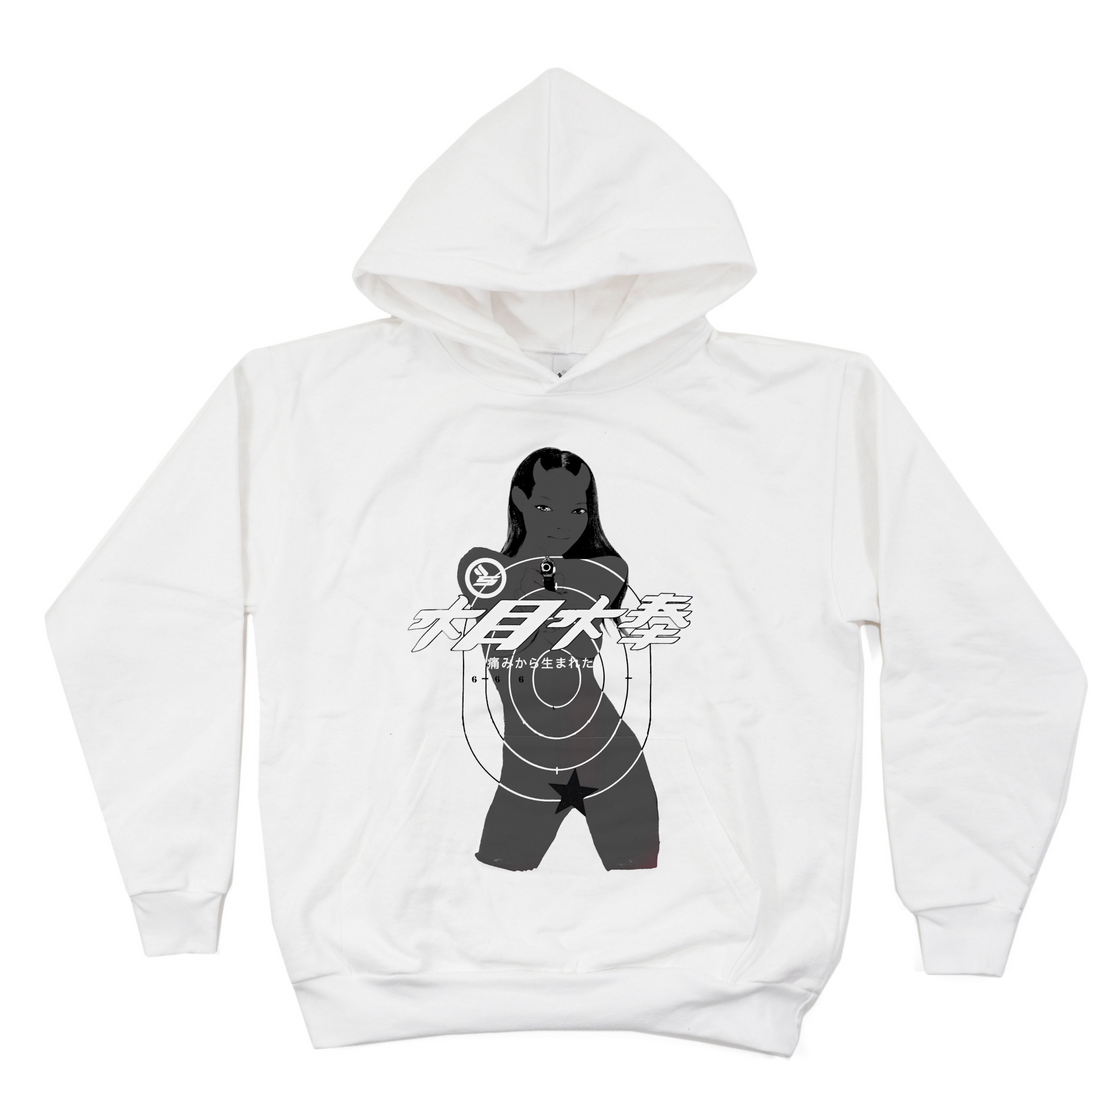 Cyber Monday Shooter Hoodie